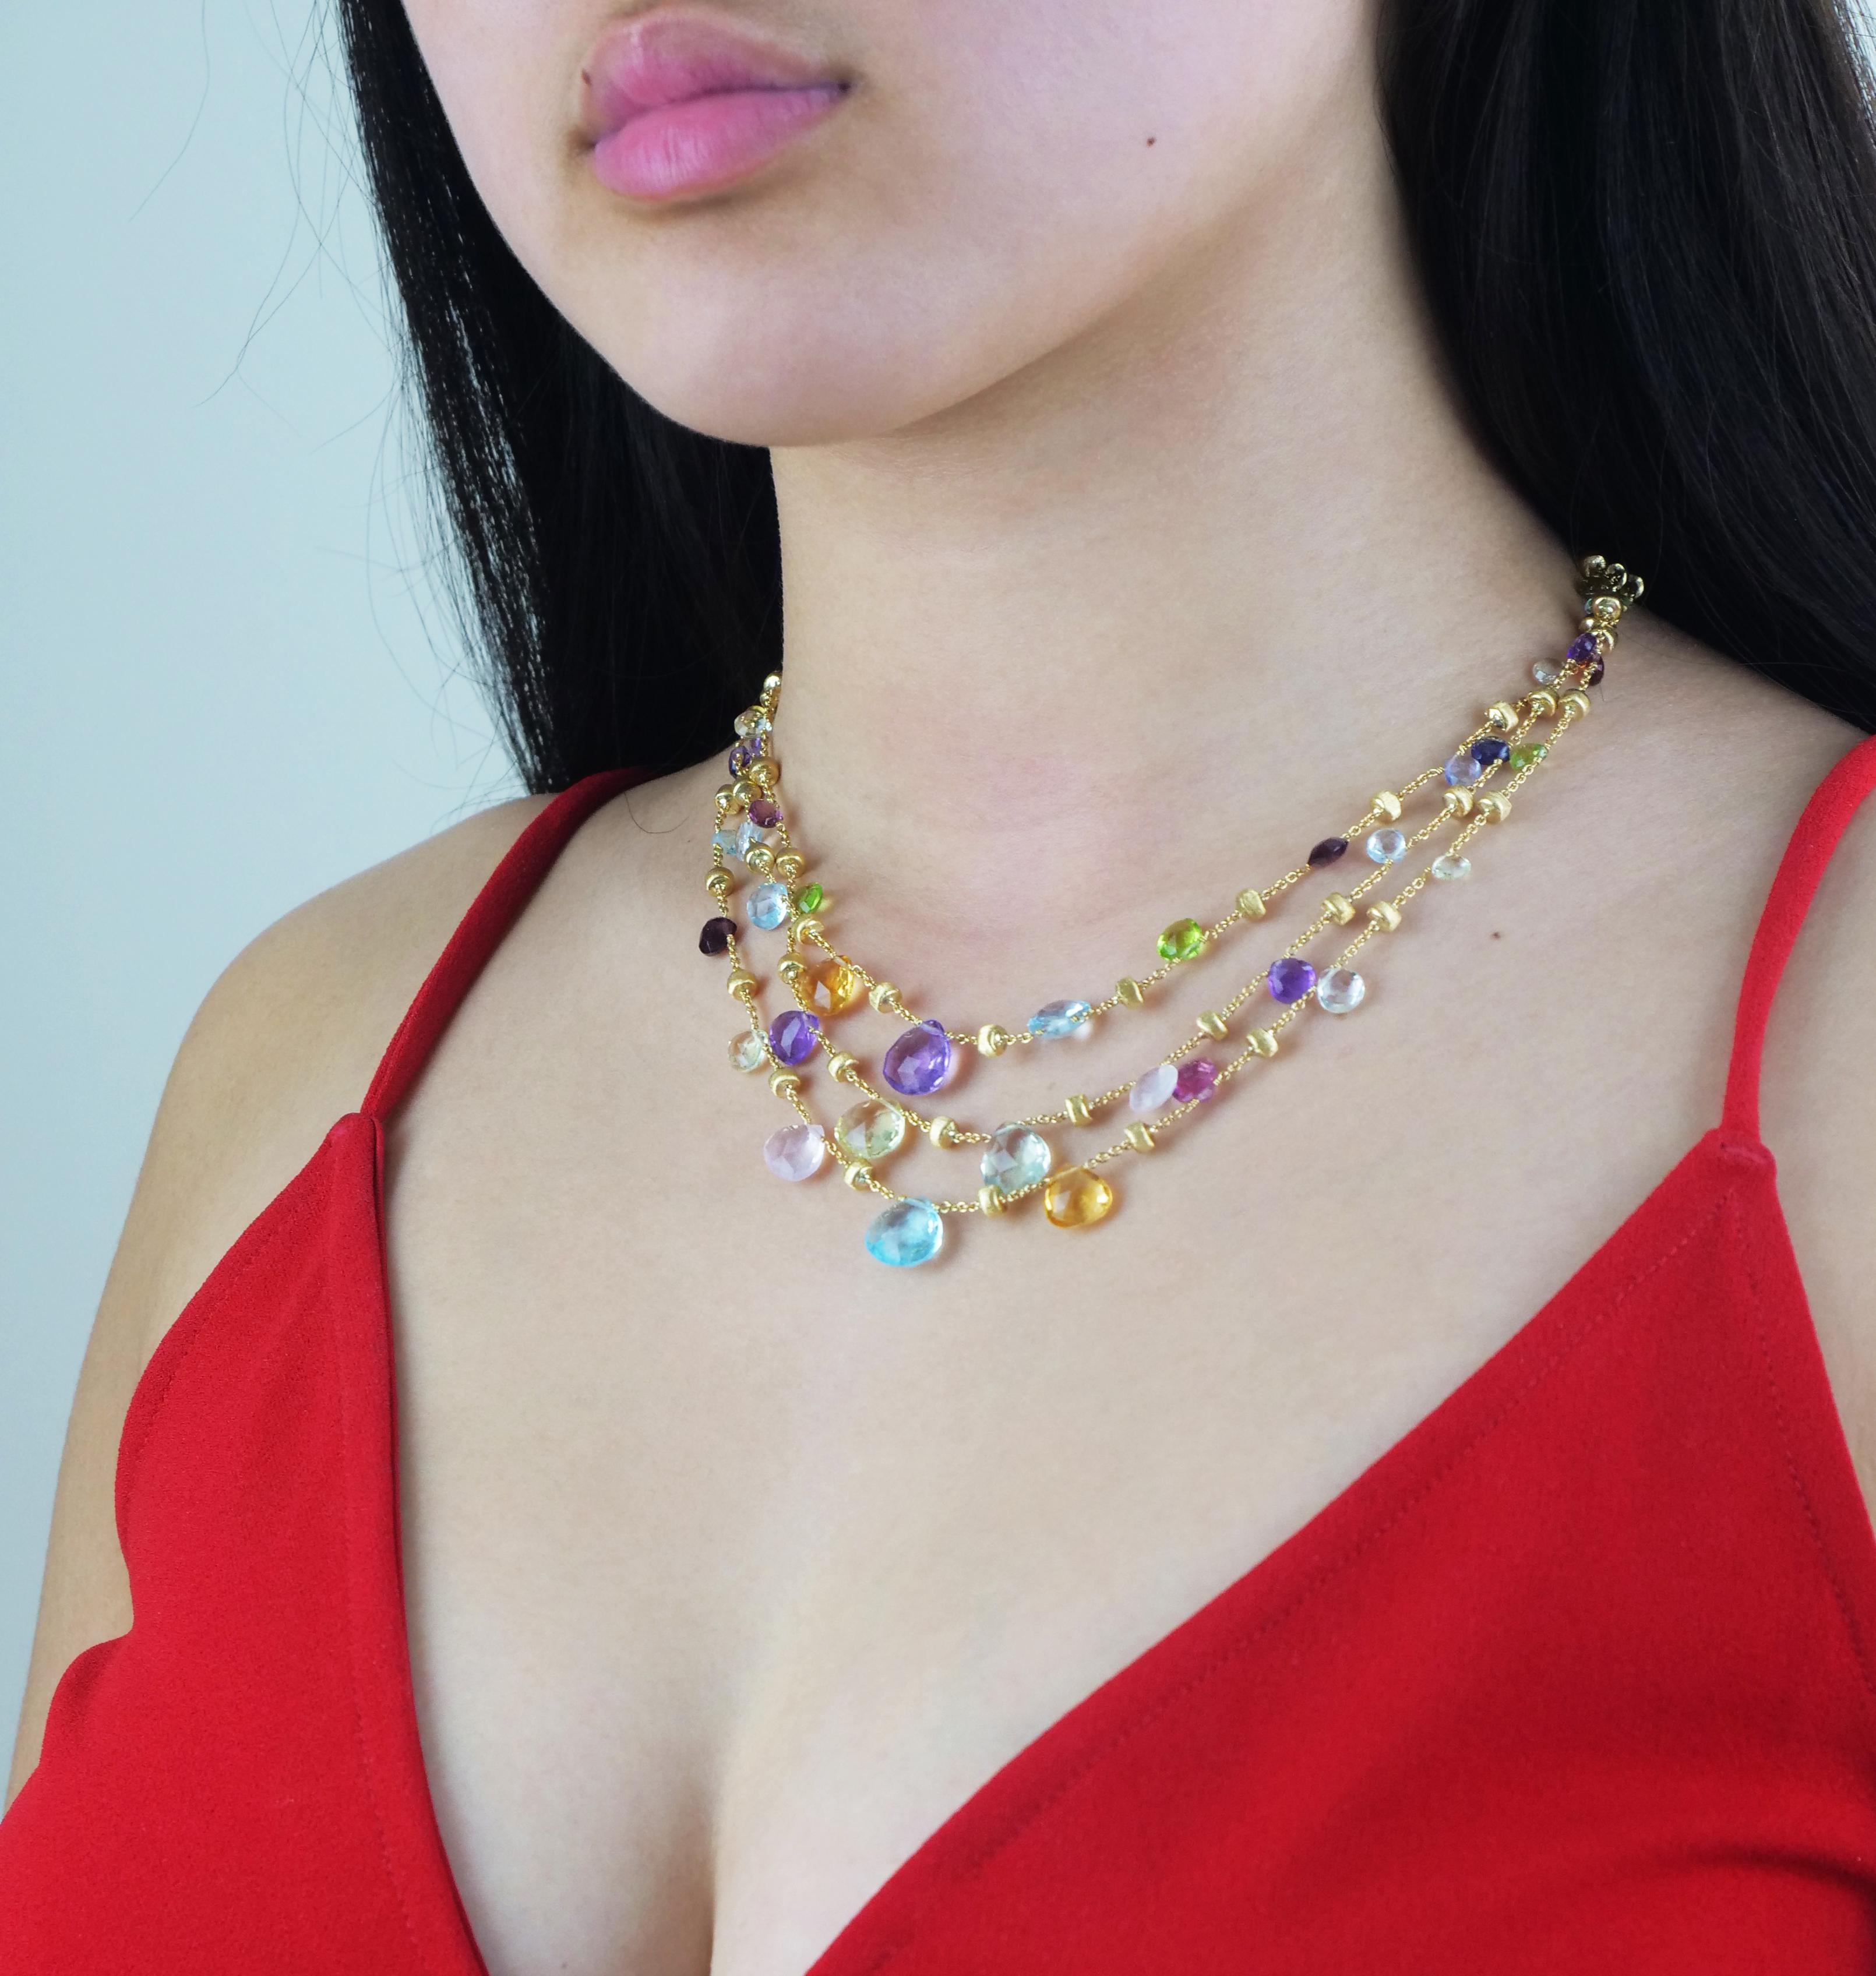 Marco Bicego Paradise 18ct yellow gold mixed stone graduated three strand necklace
The Marco Bicego Paradise collection showcases a spectacular array of multi coloured gemstones joined together to create these jewellery masterpieces. The Marco